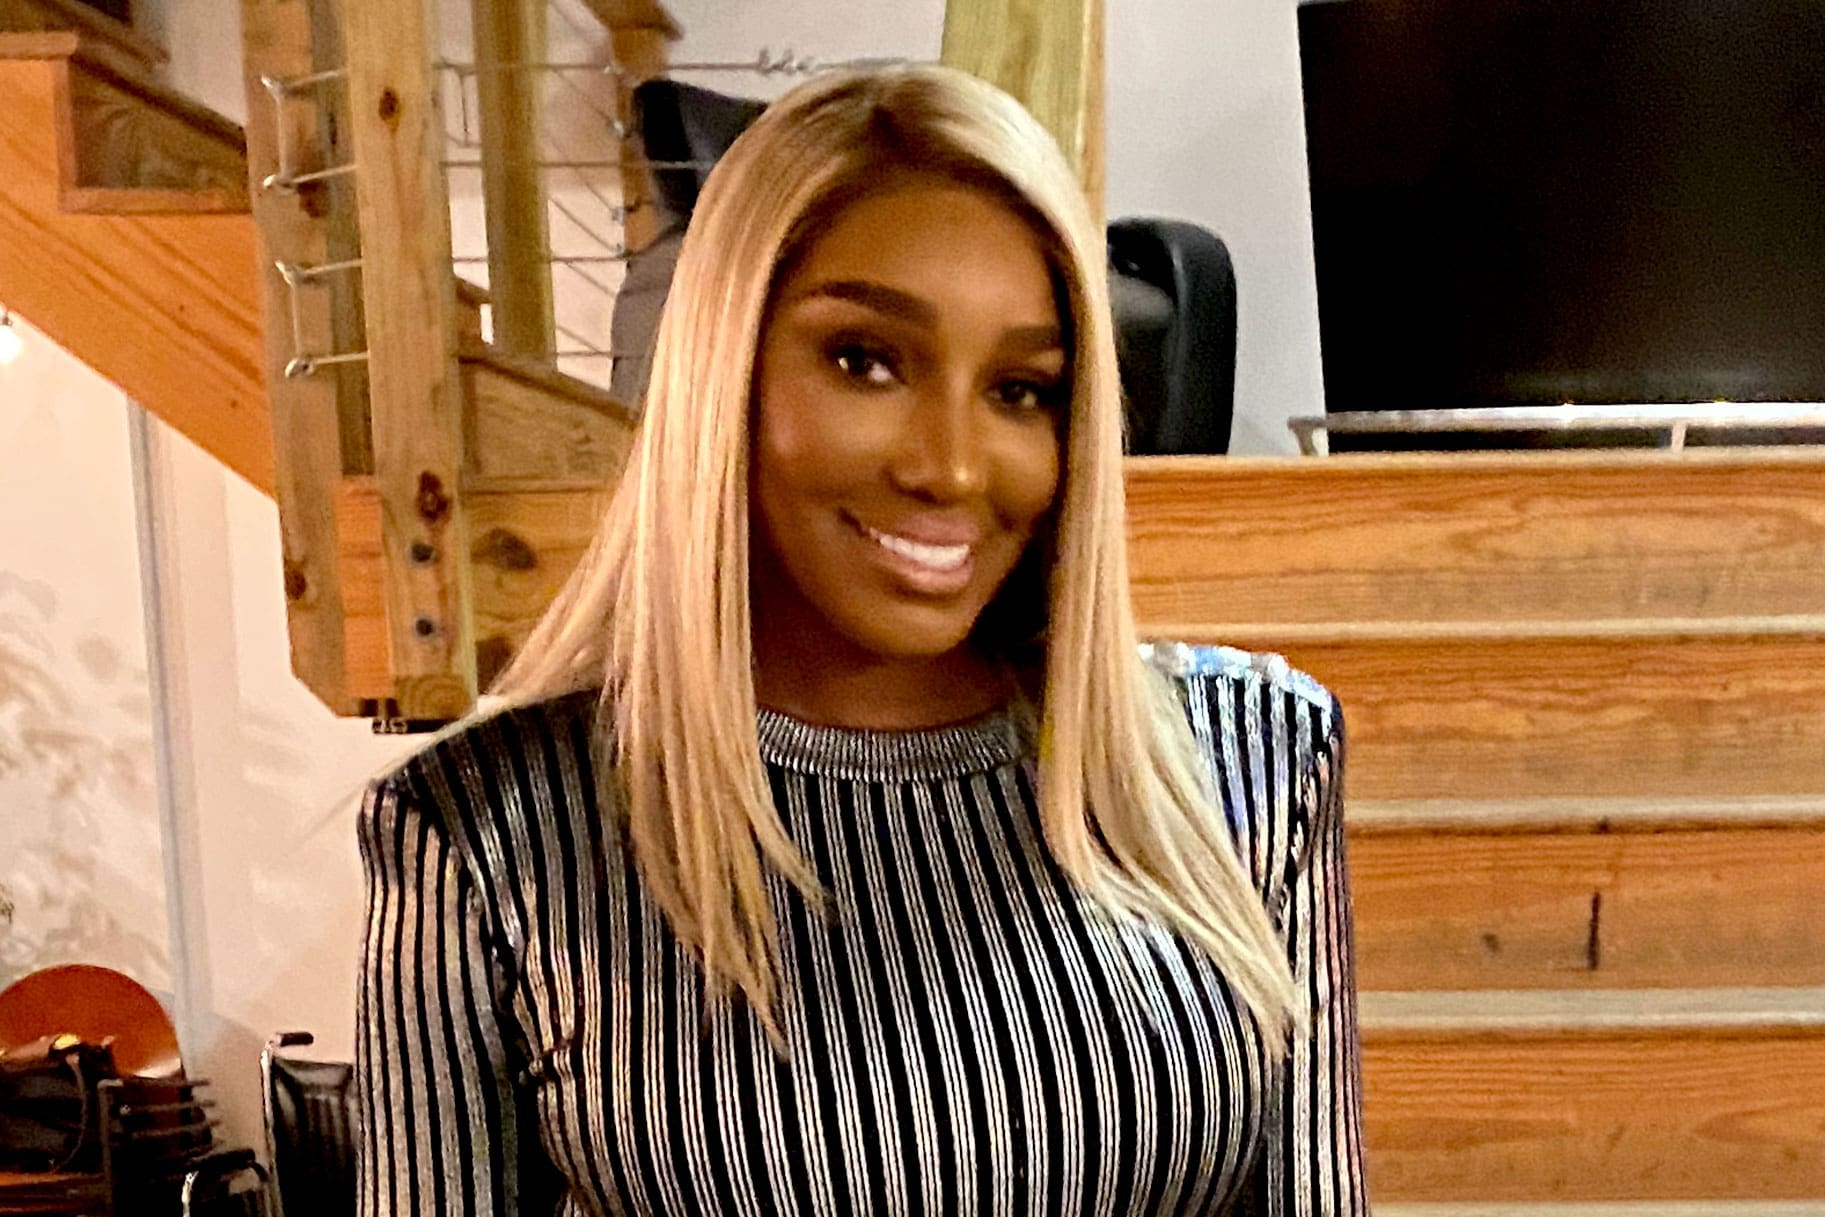 NeNe Leakes Shows Off Her Super Bowl Look And Fans Notice She Lost Weight